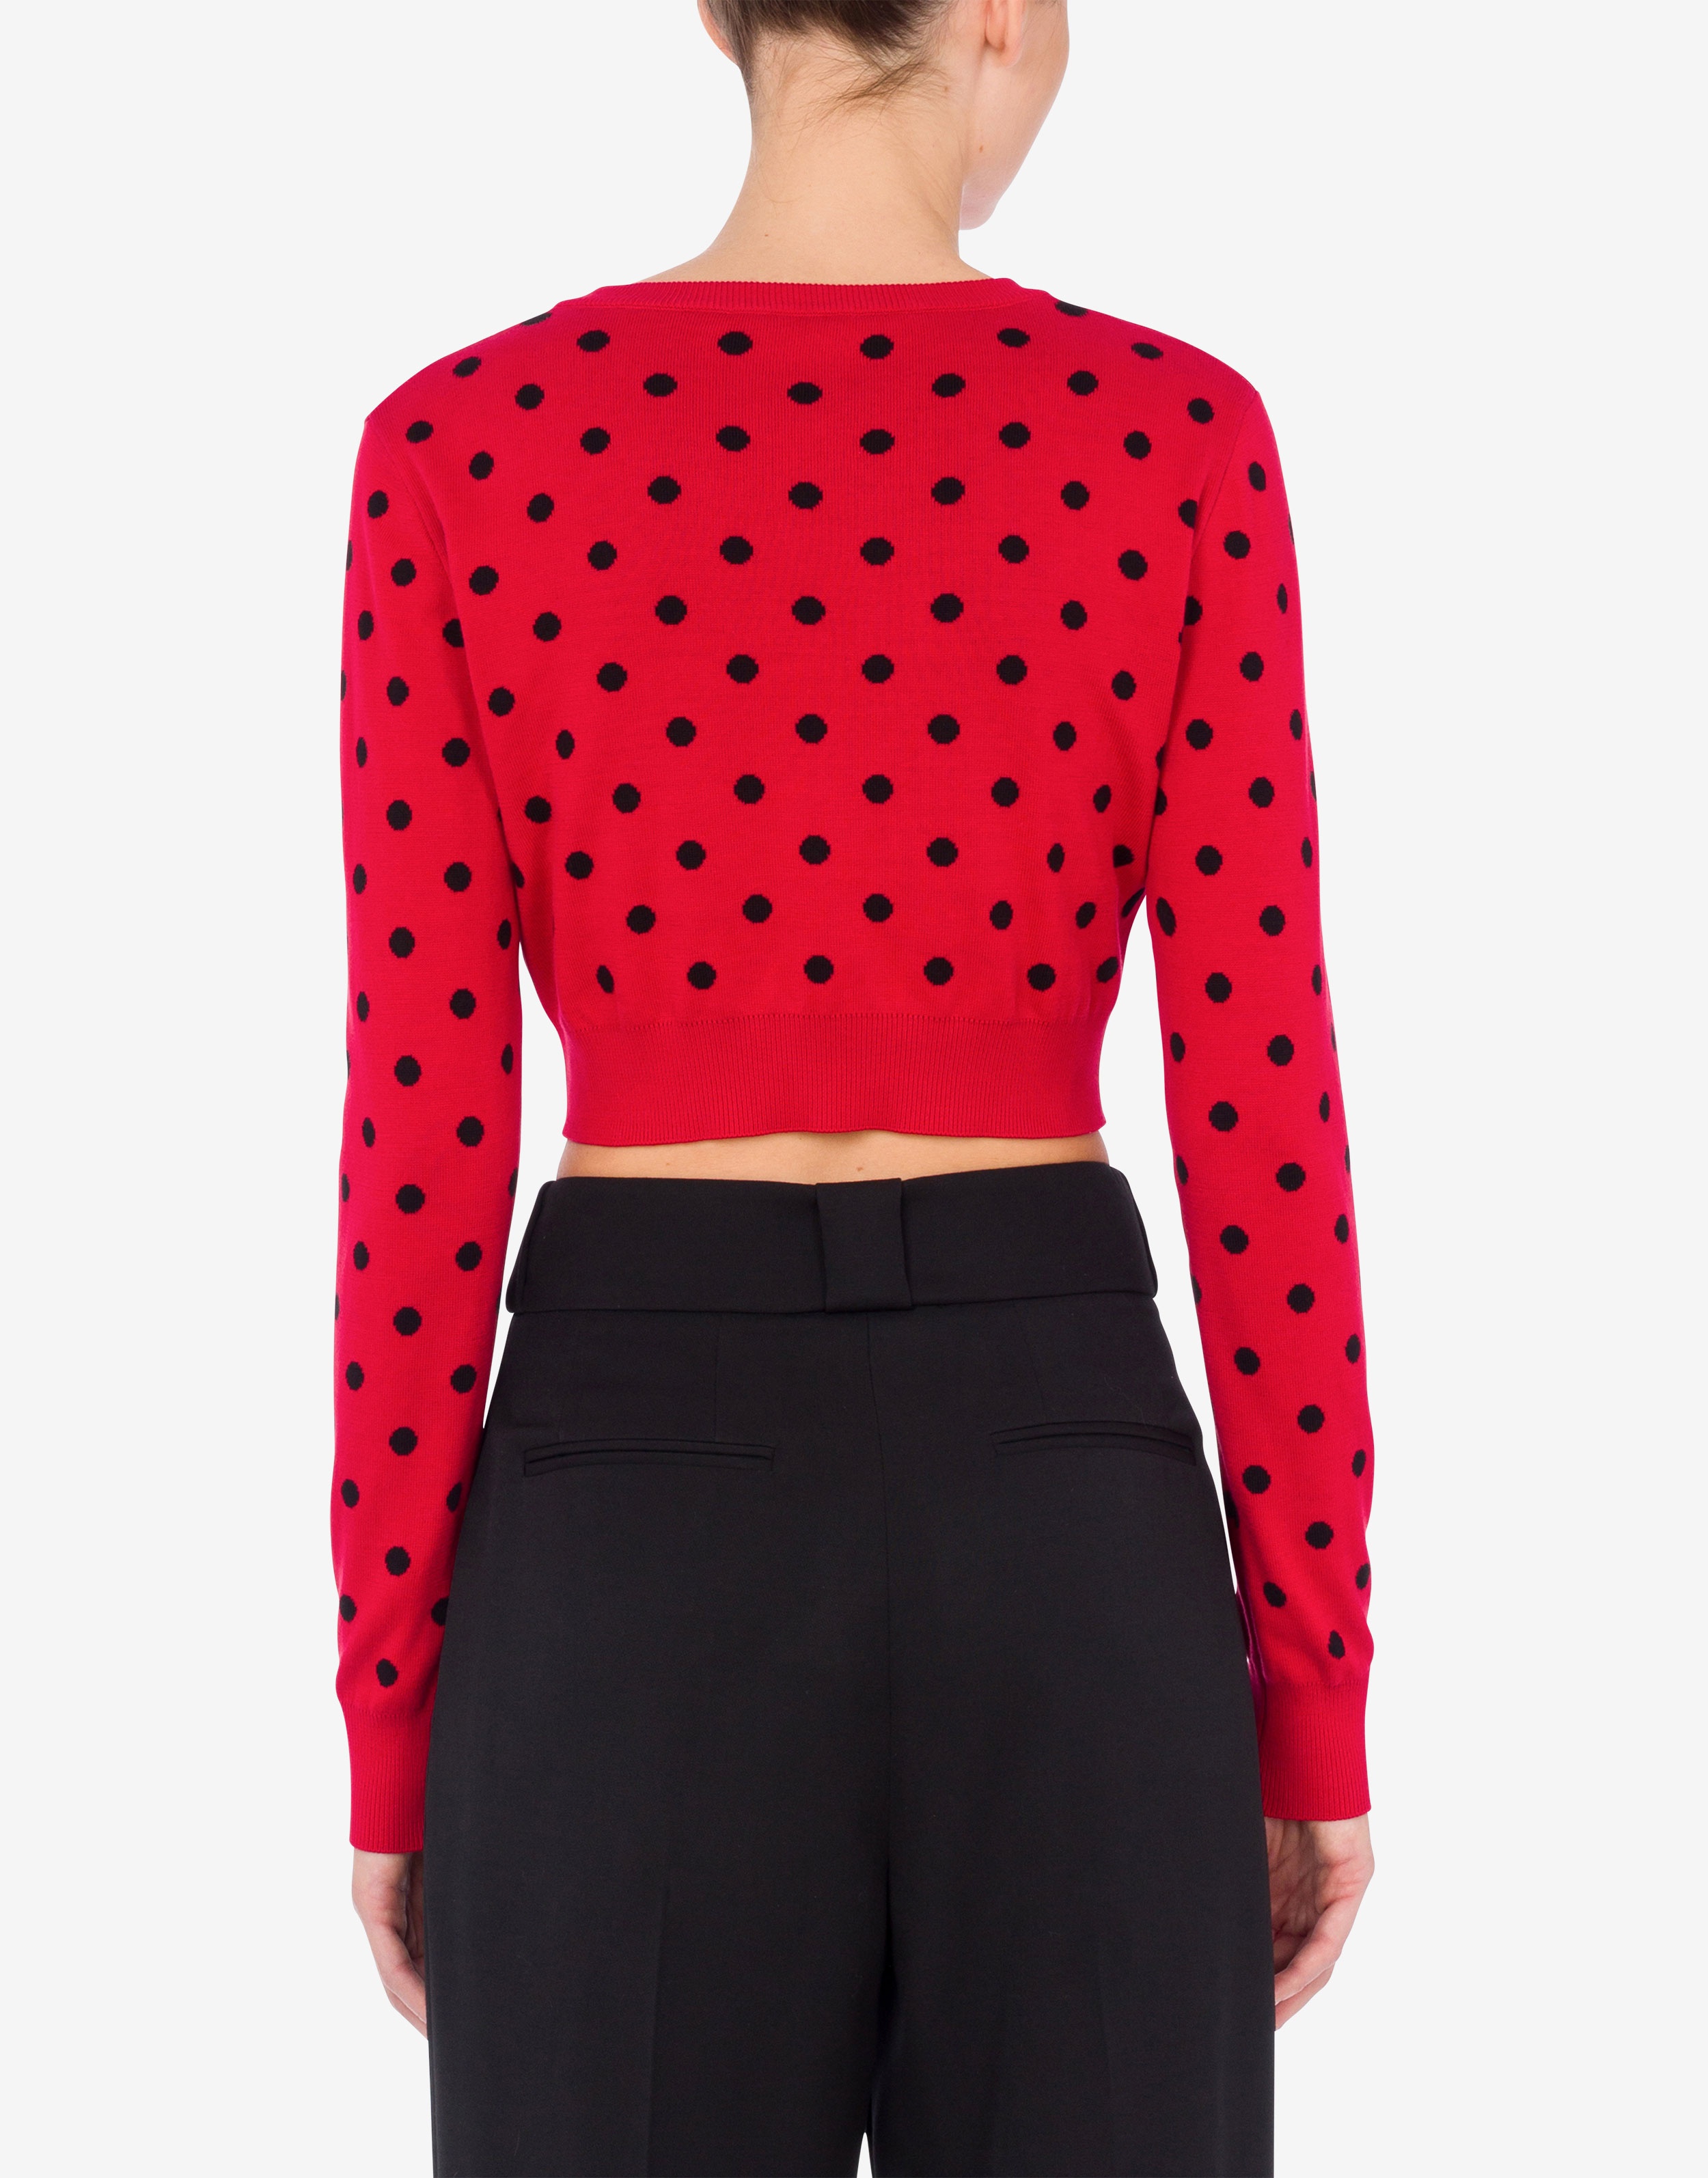 ALLOVER POLKA DOTS KNITTED CROPPED CARDIGAN - 3